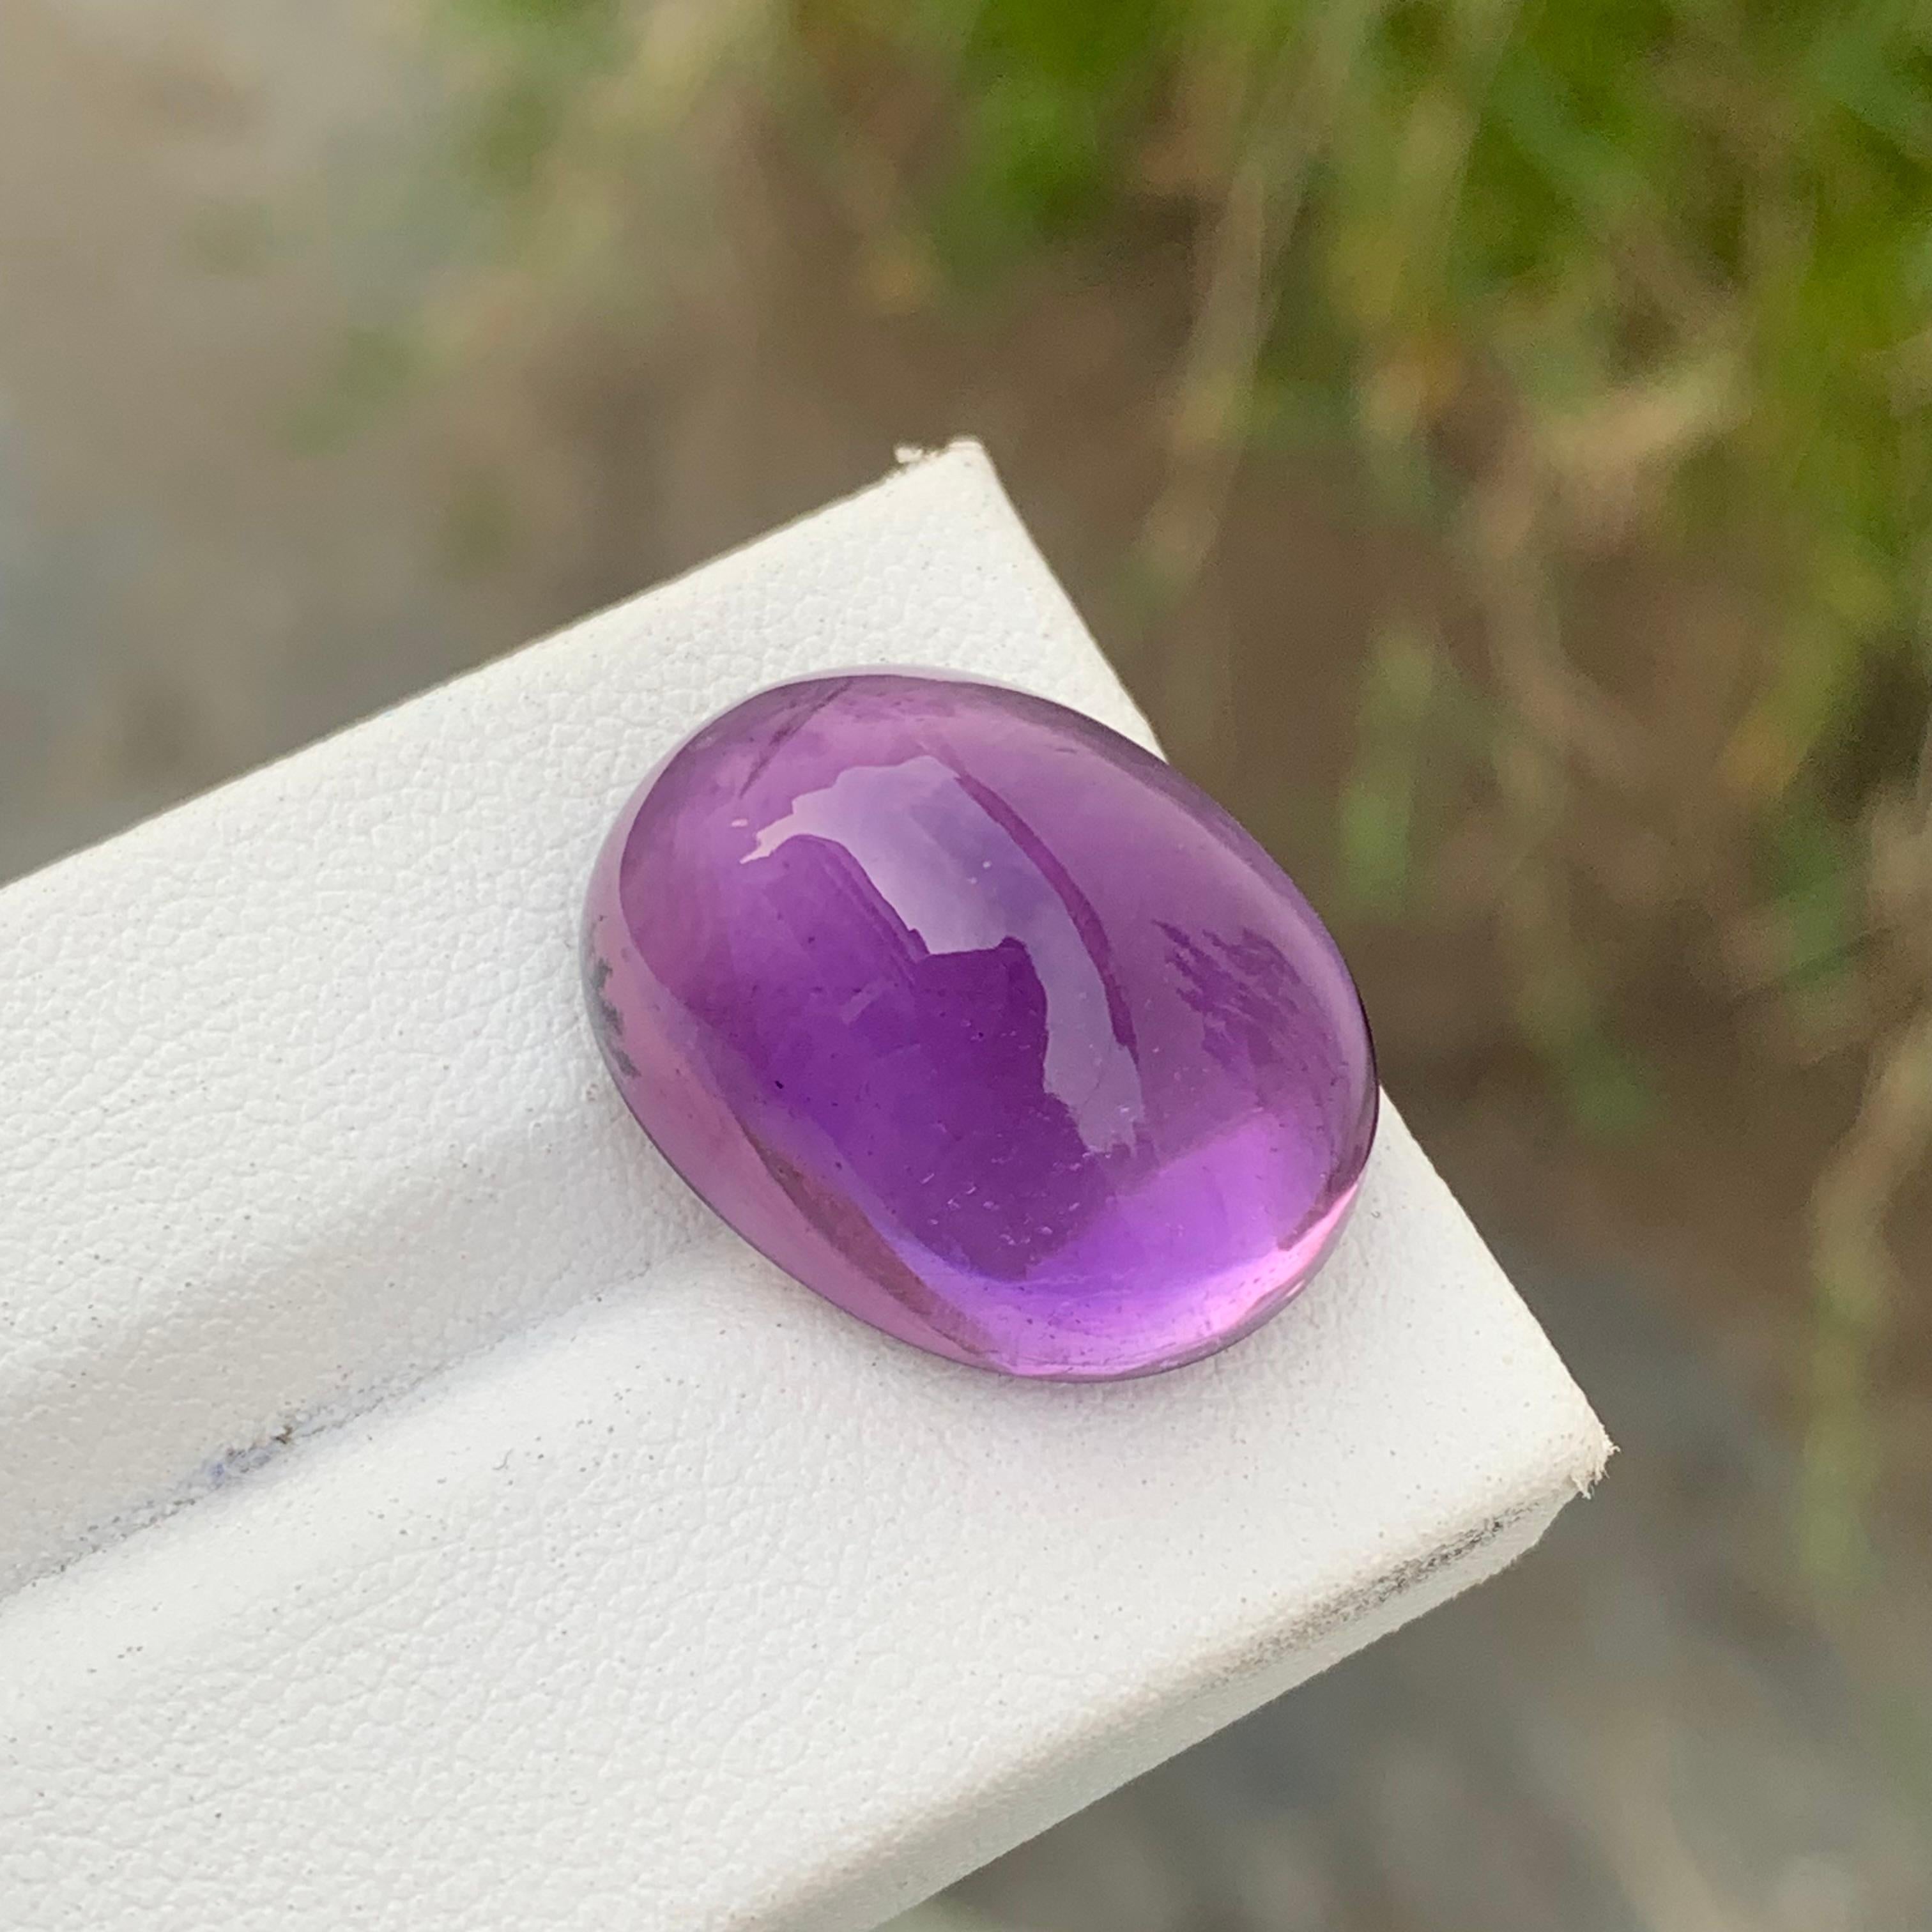 Gemstone Type : Amethyst
Weight : 27.10 Carats
Dimensions: 20x16.3x11.1 mm
Clarity : Clean
Origin : Brazil
Color: Purple
Shape: Ova Cab
Facet: Cabochon
Certificate: On Demand
Month: February
.
Purported amethyst powers for healing
enhancing the